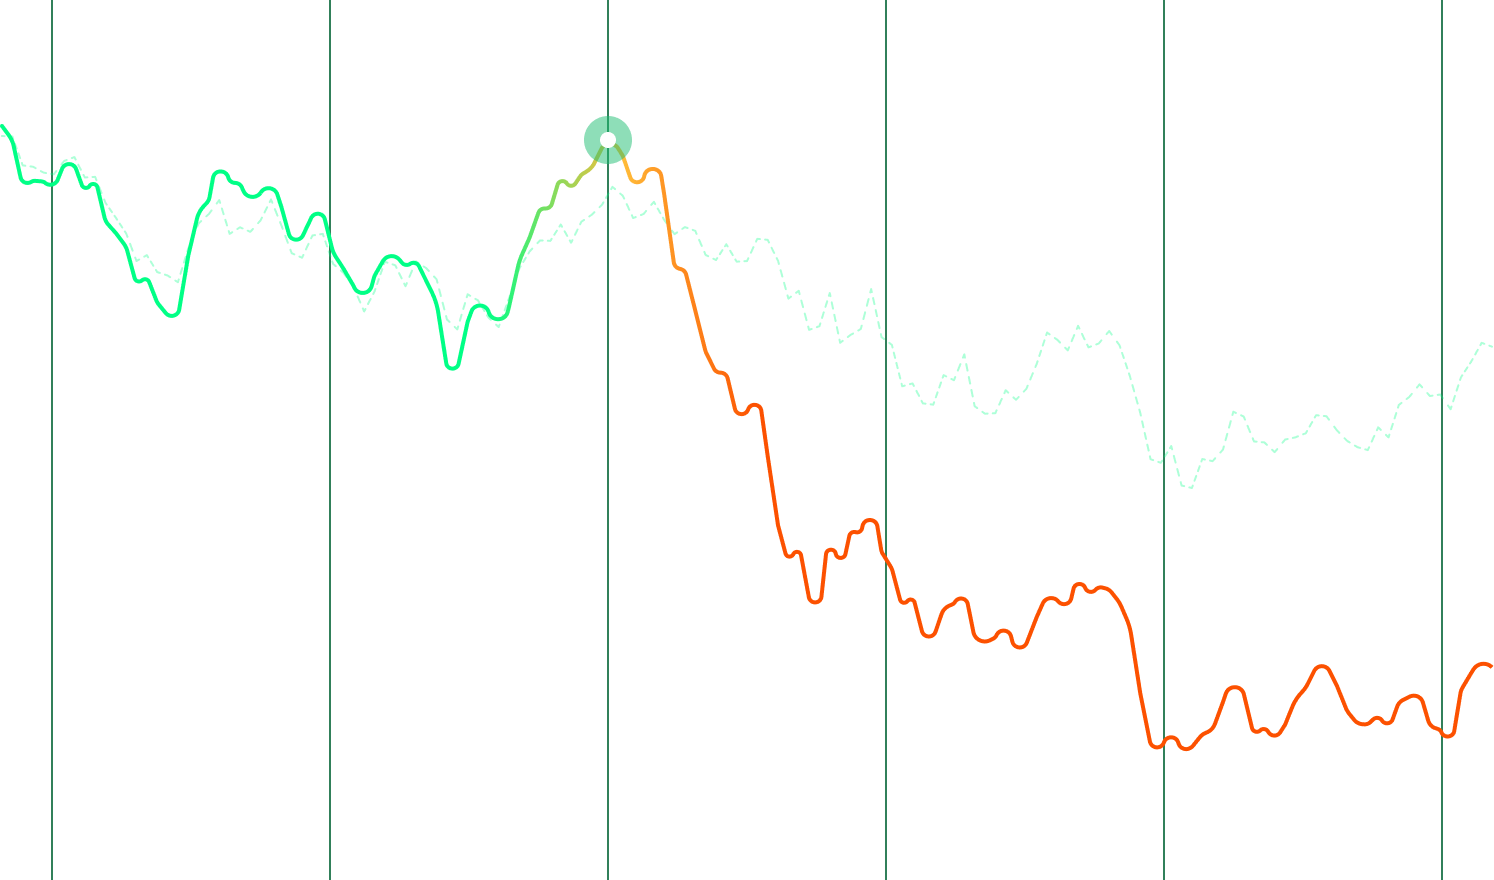 Decorative image of a stock graph peaking then moving downwards, indicating momentum of sell.